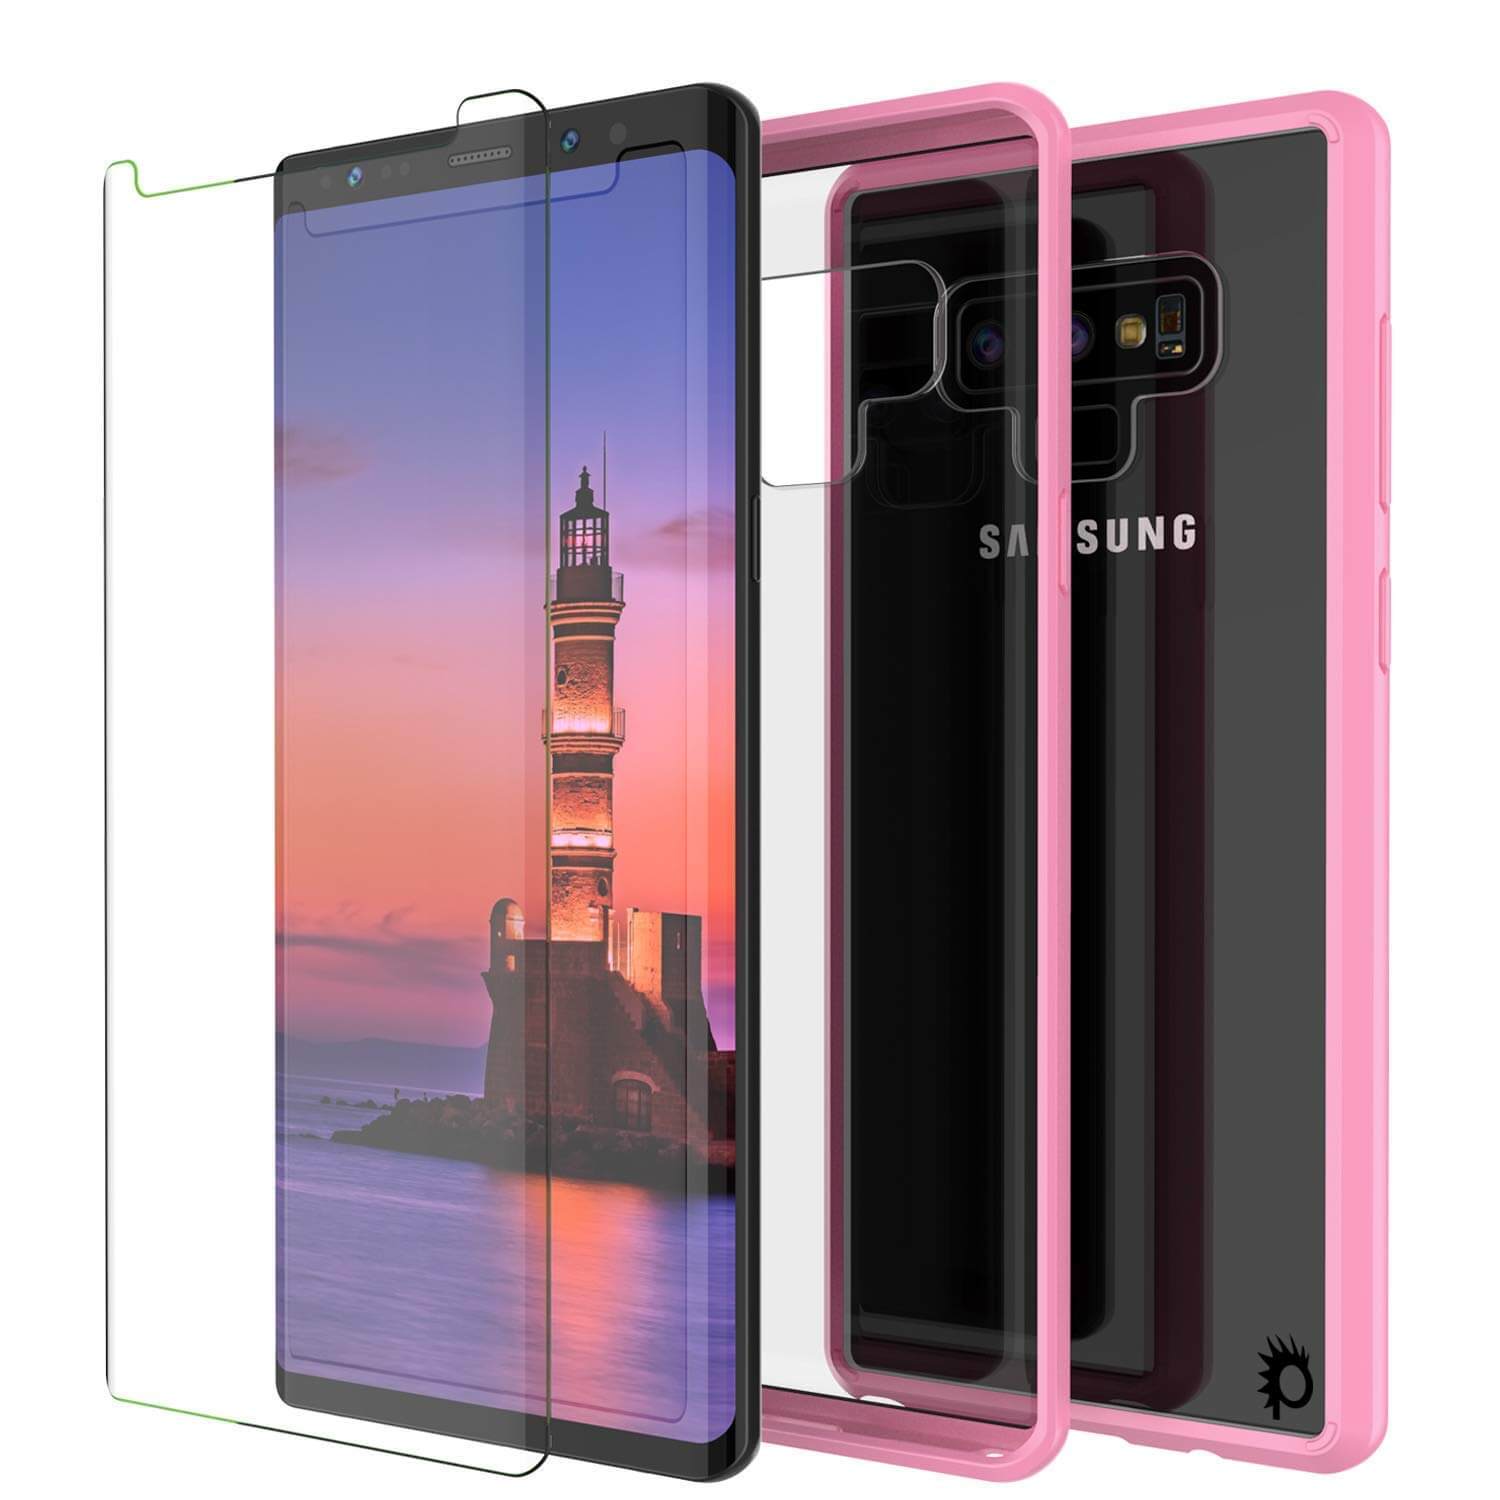 Galaxy Note 9 Punkcase Lucid-2.0 Series Slim Fit Armor Pink Case Cover